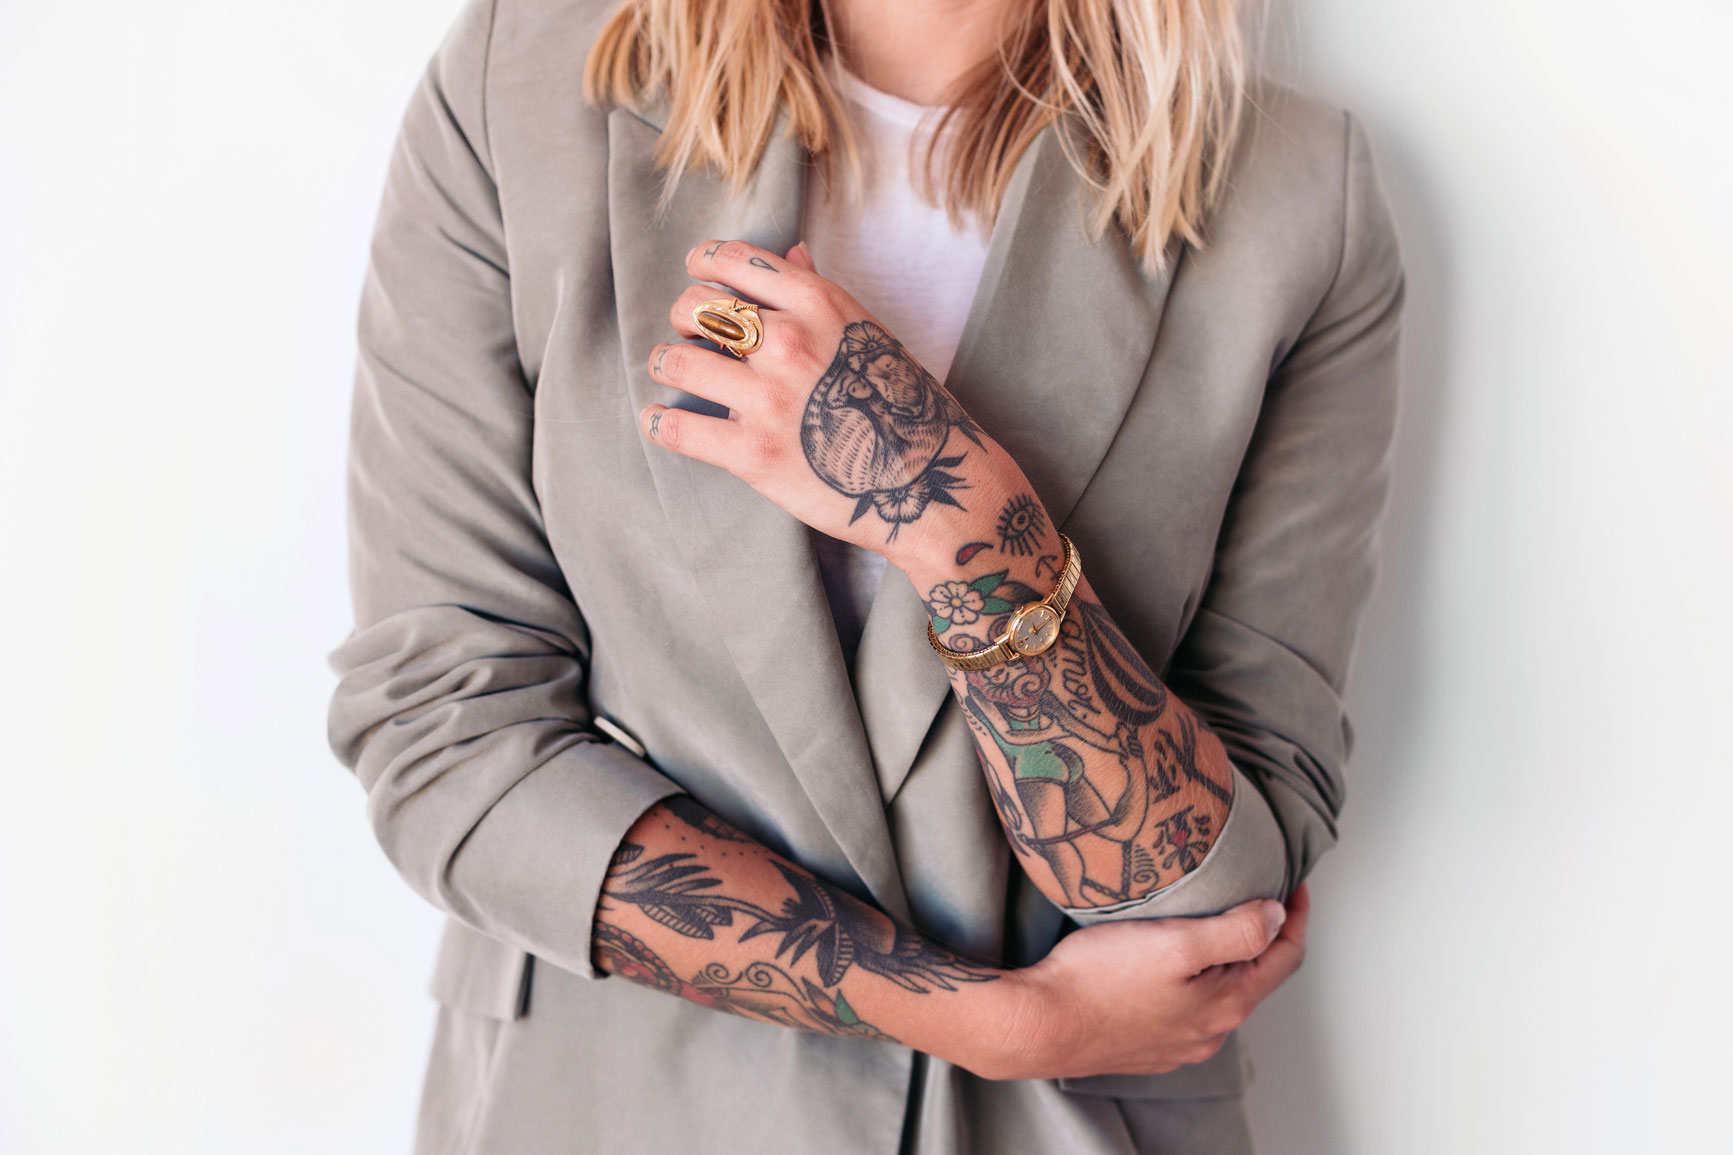 woman's arms covered in tattoos